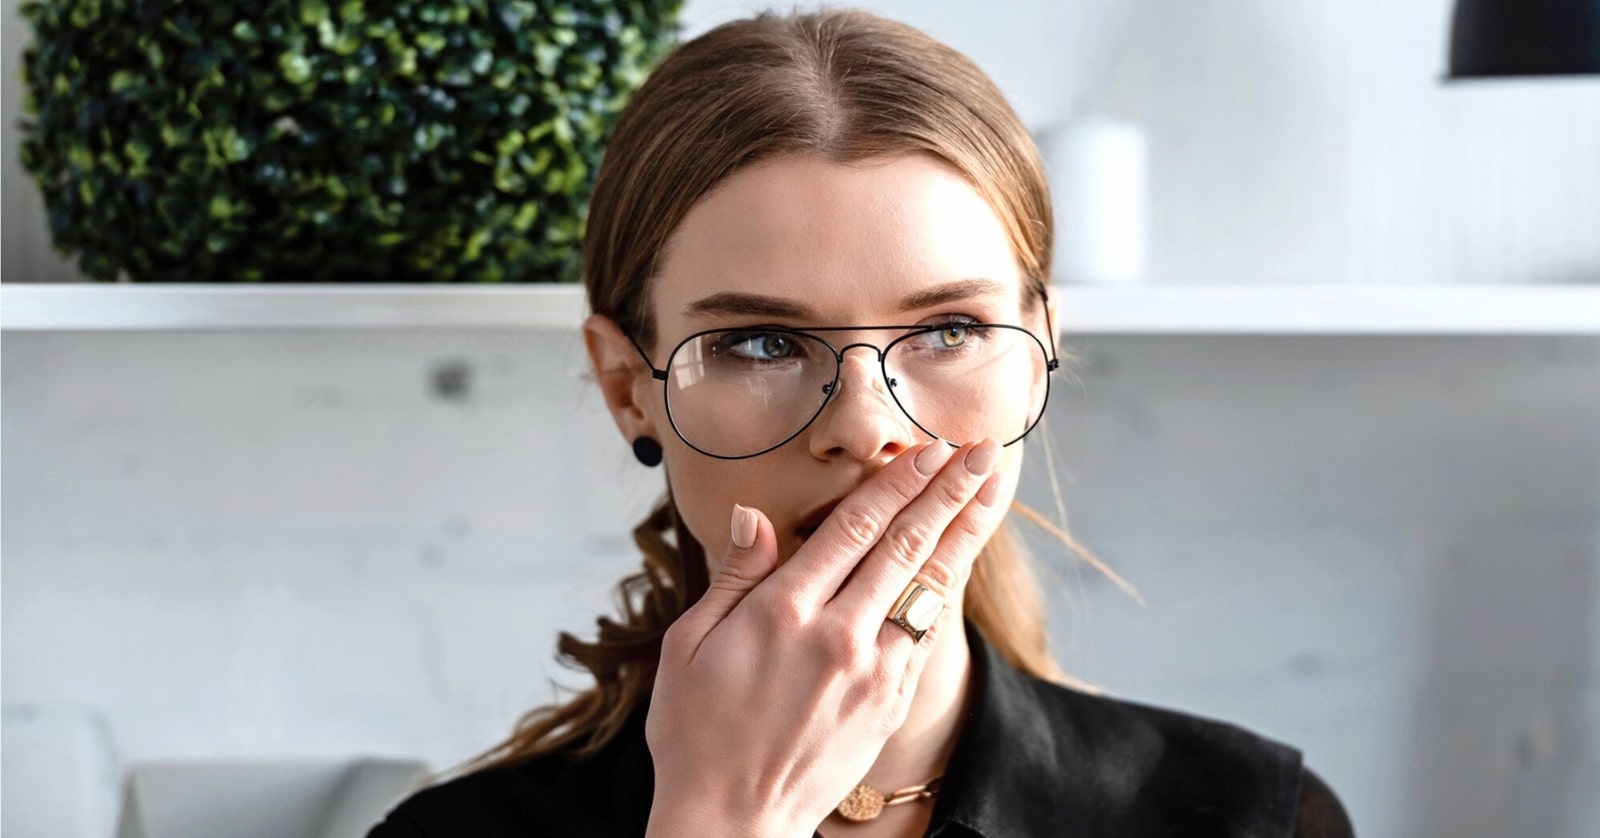 A person with long brown hair wears large round glasses and black clothing, positioned in front of a white background with green foliage. They have their right hand covering their mouth, appearing surprised or concerned.